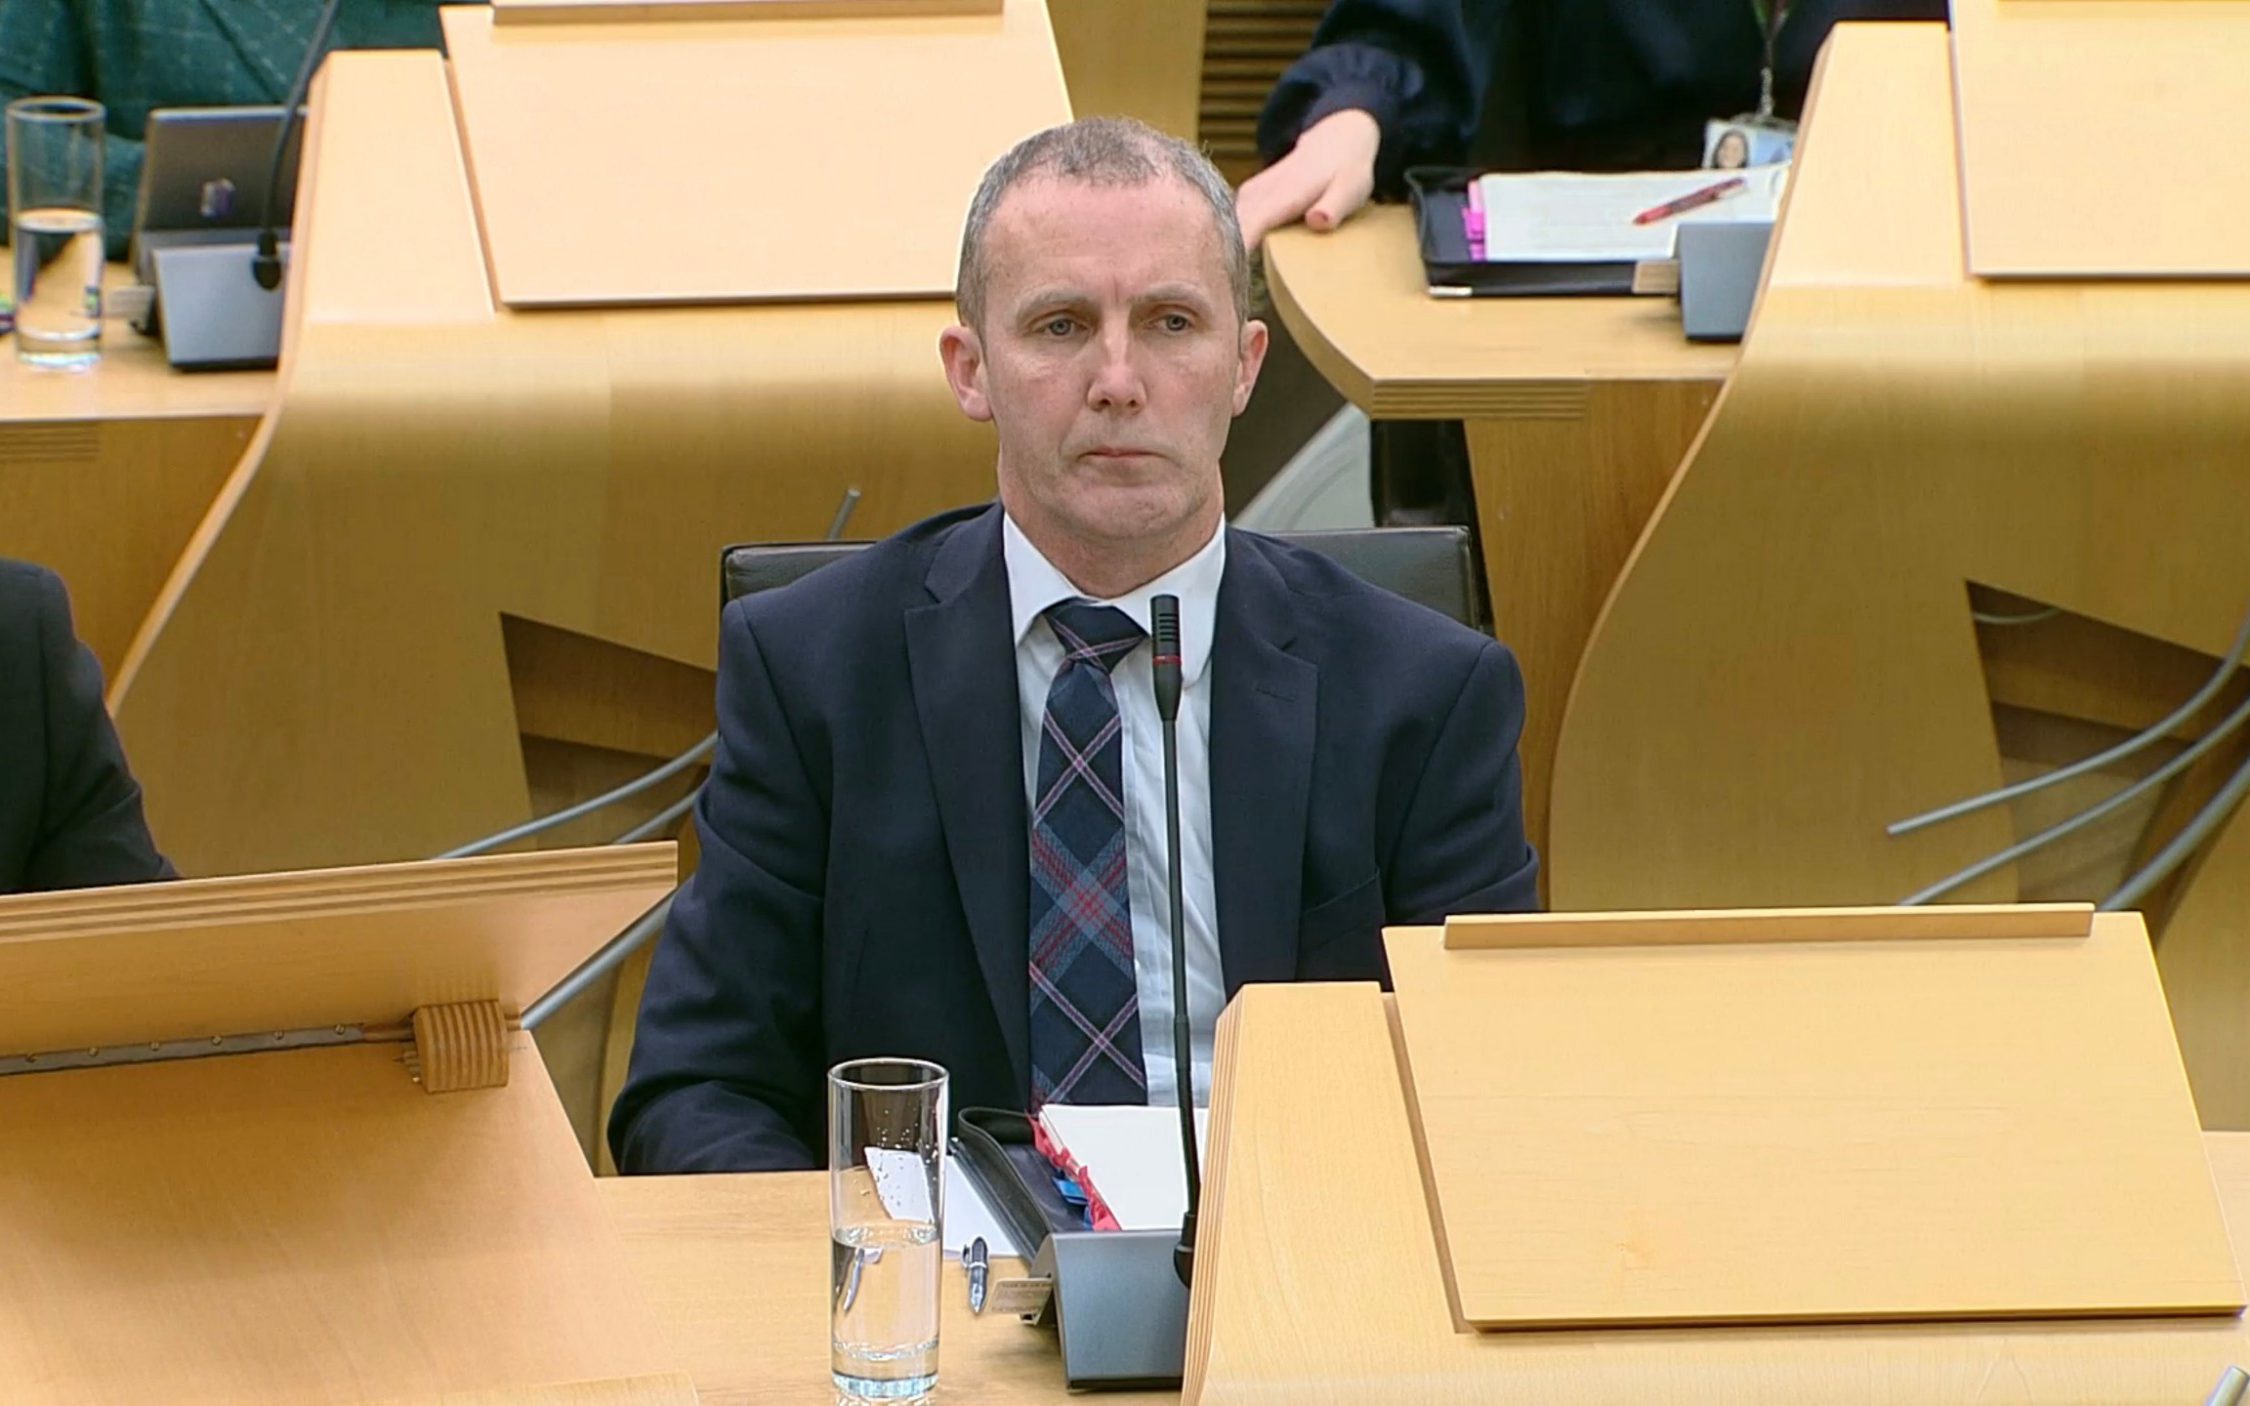 holyrood urged to call police to investigate michael matheson’s ipad roaming bill